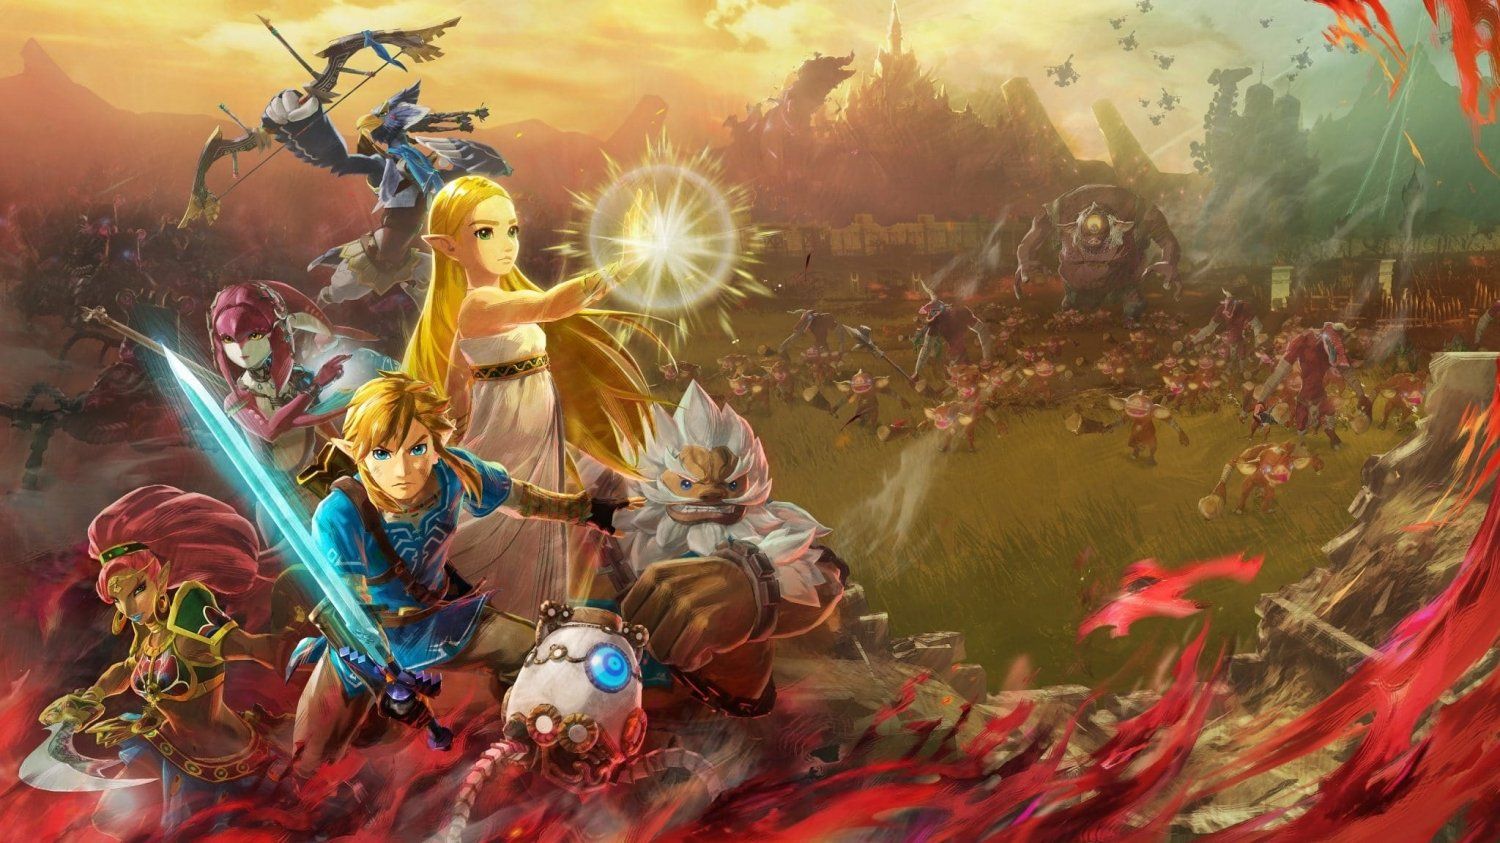 Nintendo: Breath of the Wild 2 news won't happen for a while